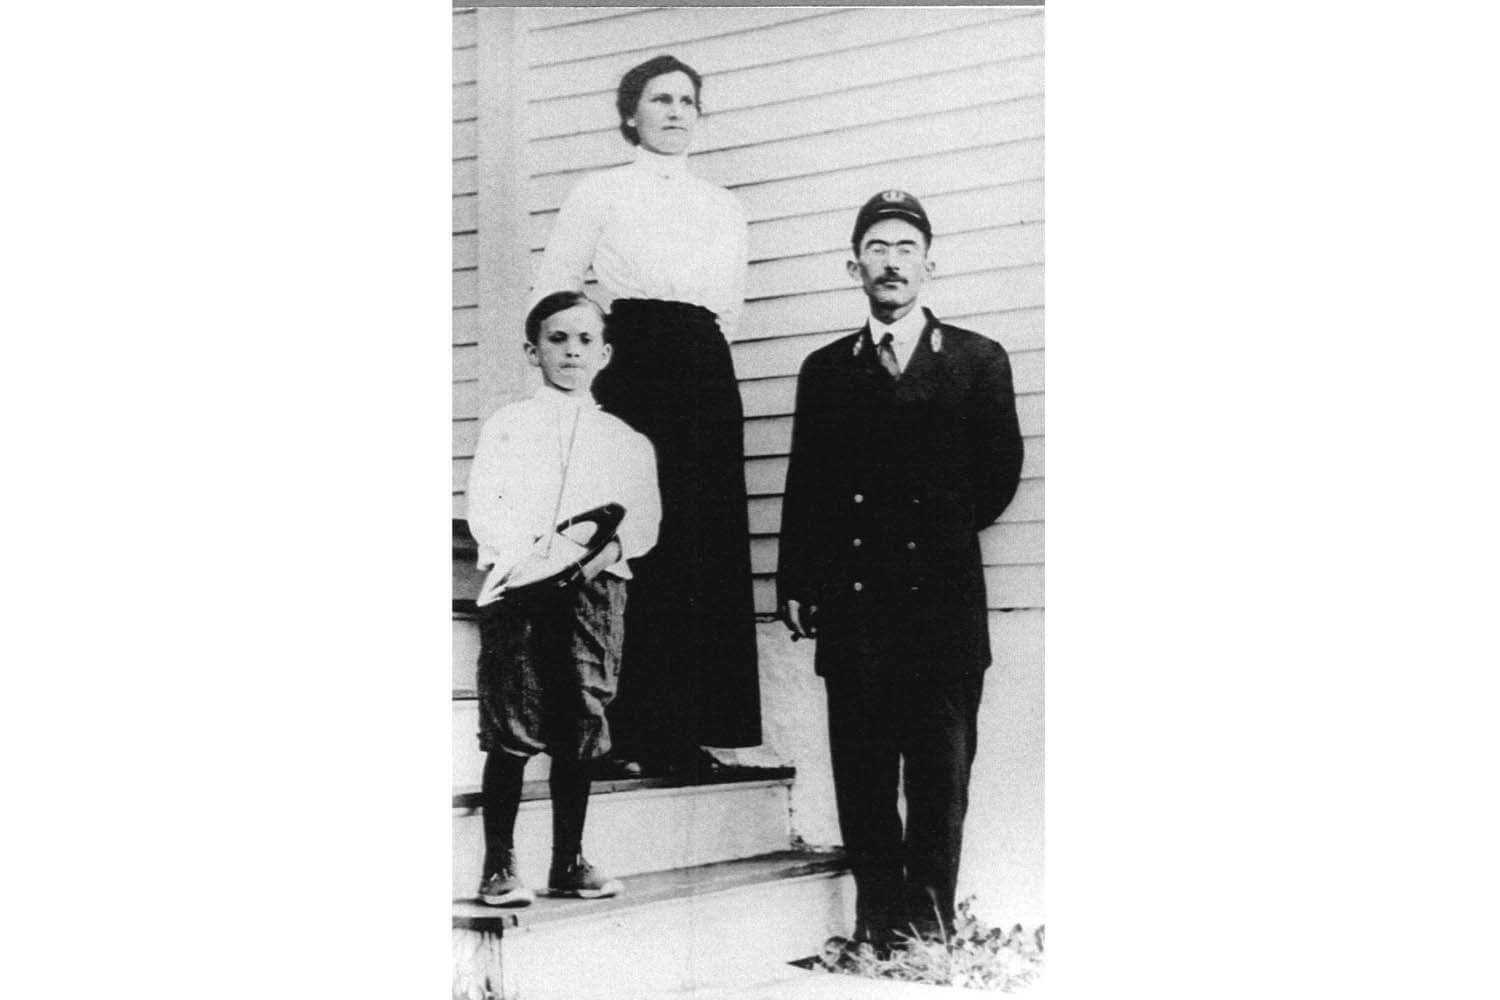 Assistant keeper John E.H. Cook with his wife Emma and son Donald in 1911.